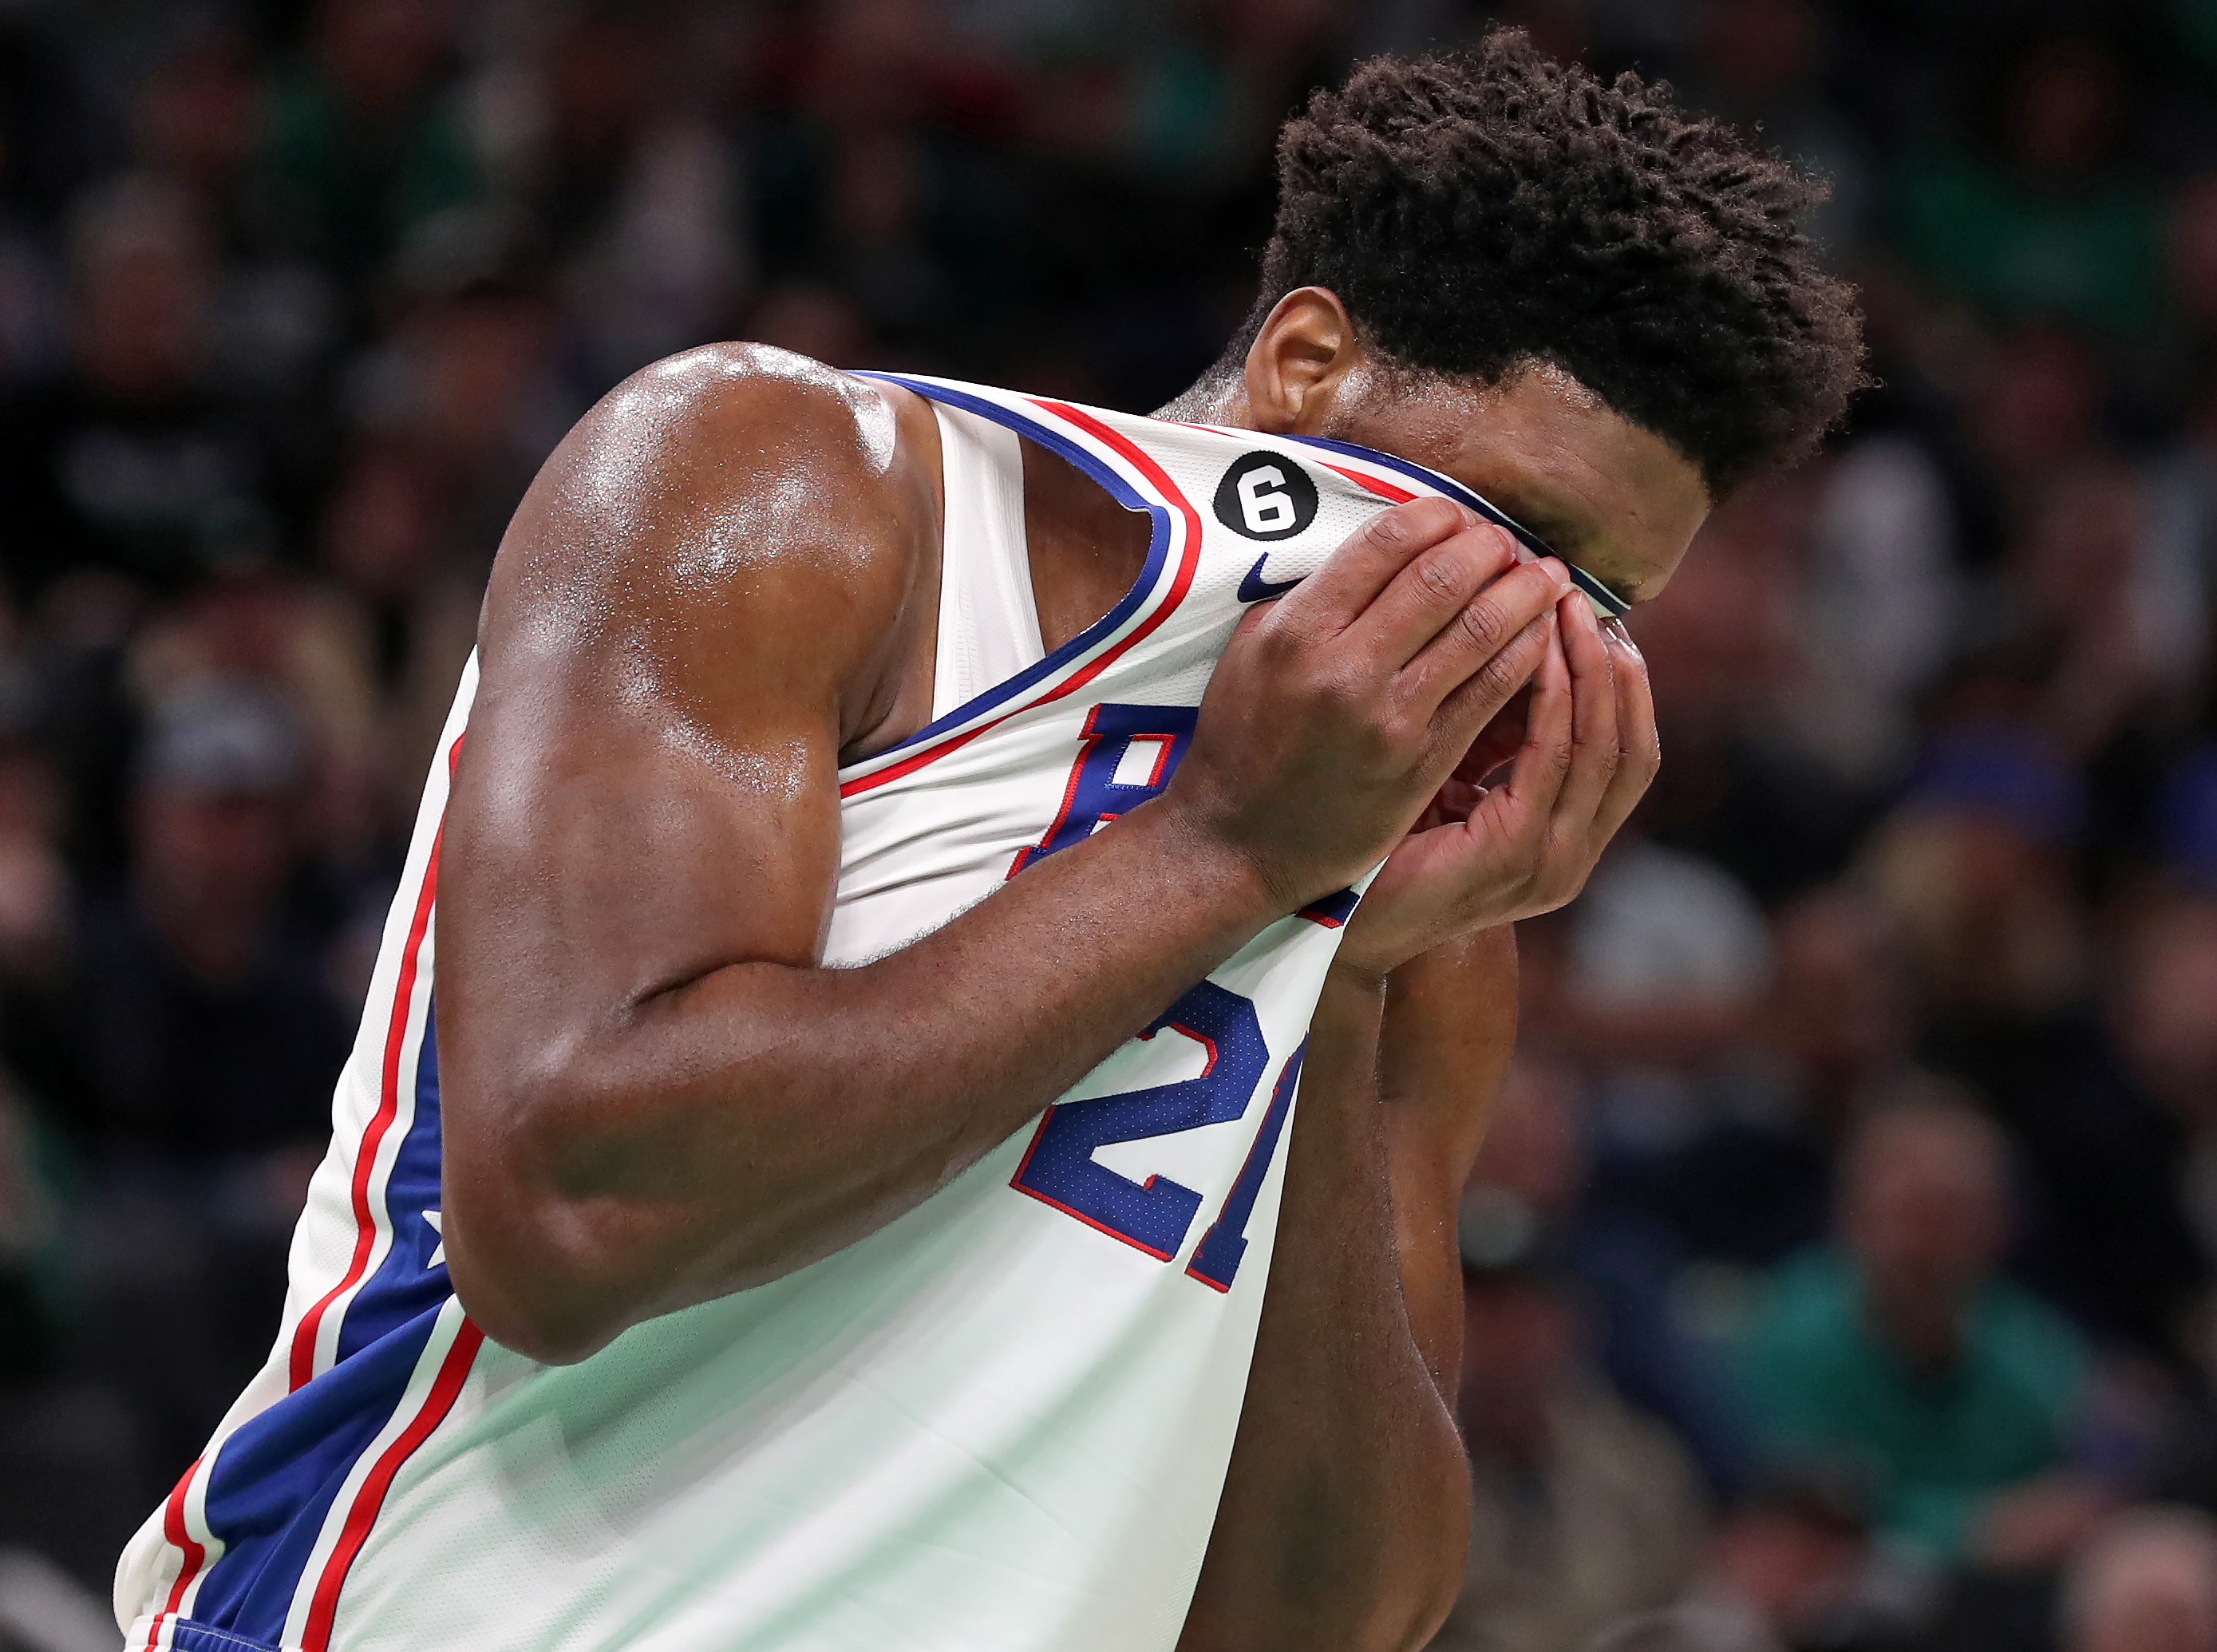 What are the Sixers' NBA title chances, Joel Embiid's MVP chances?